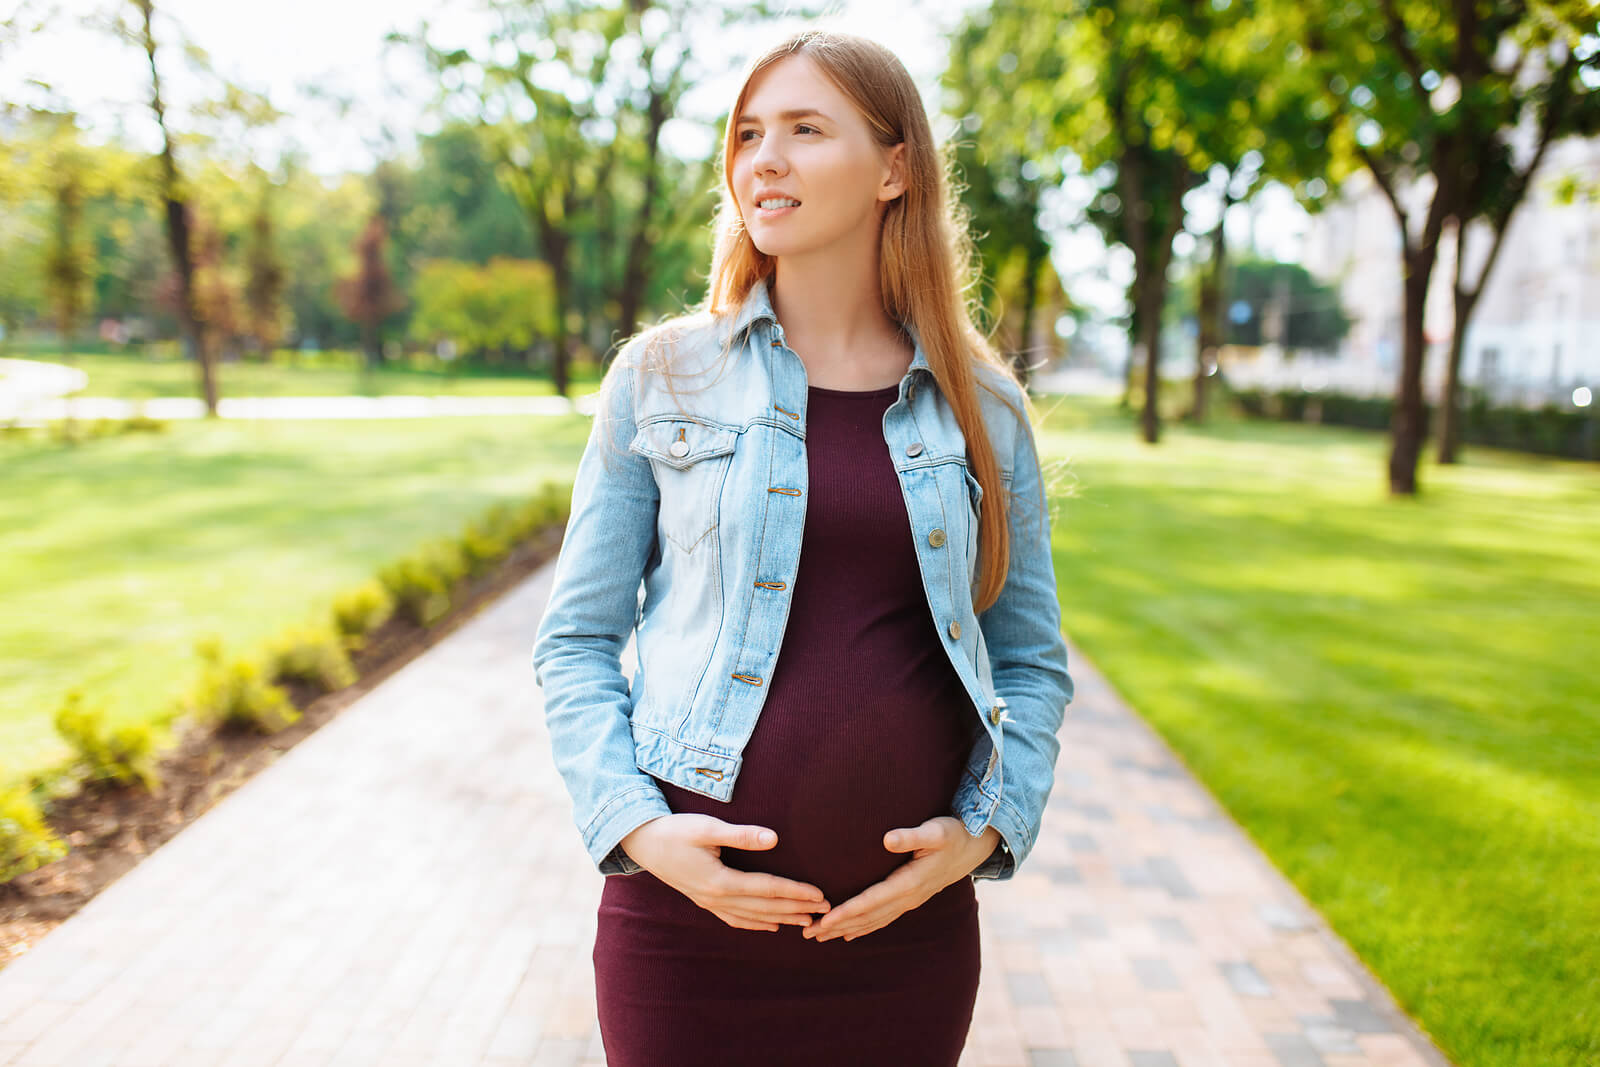 pregnant student walking in park